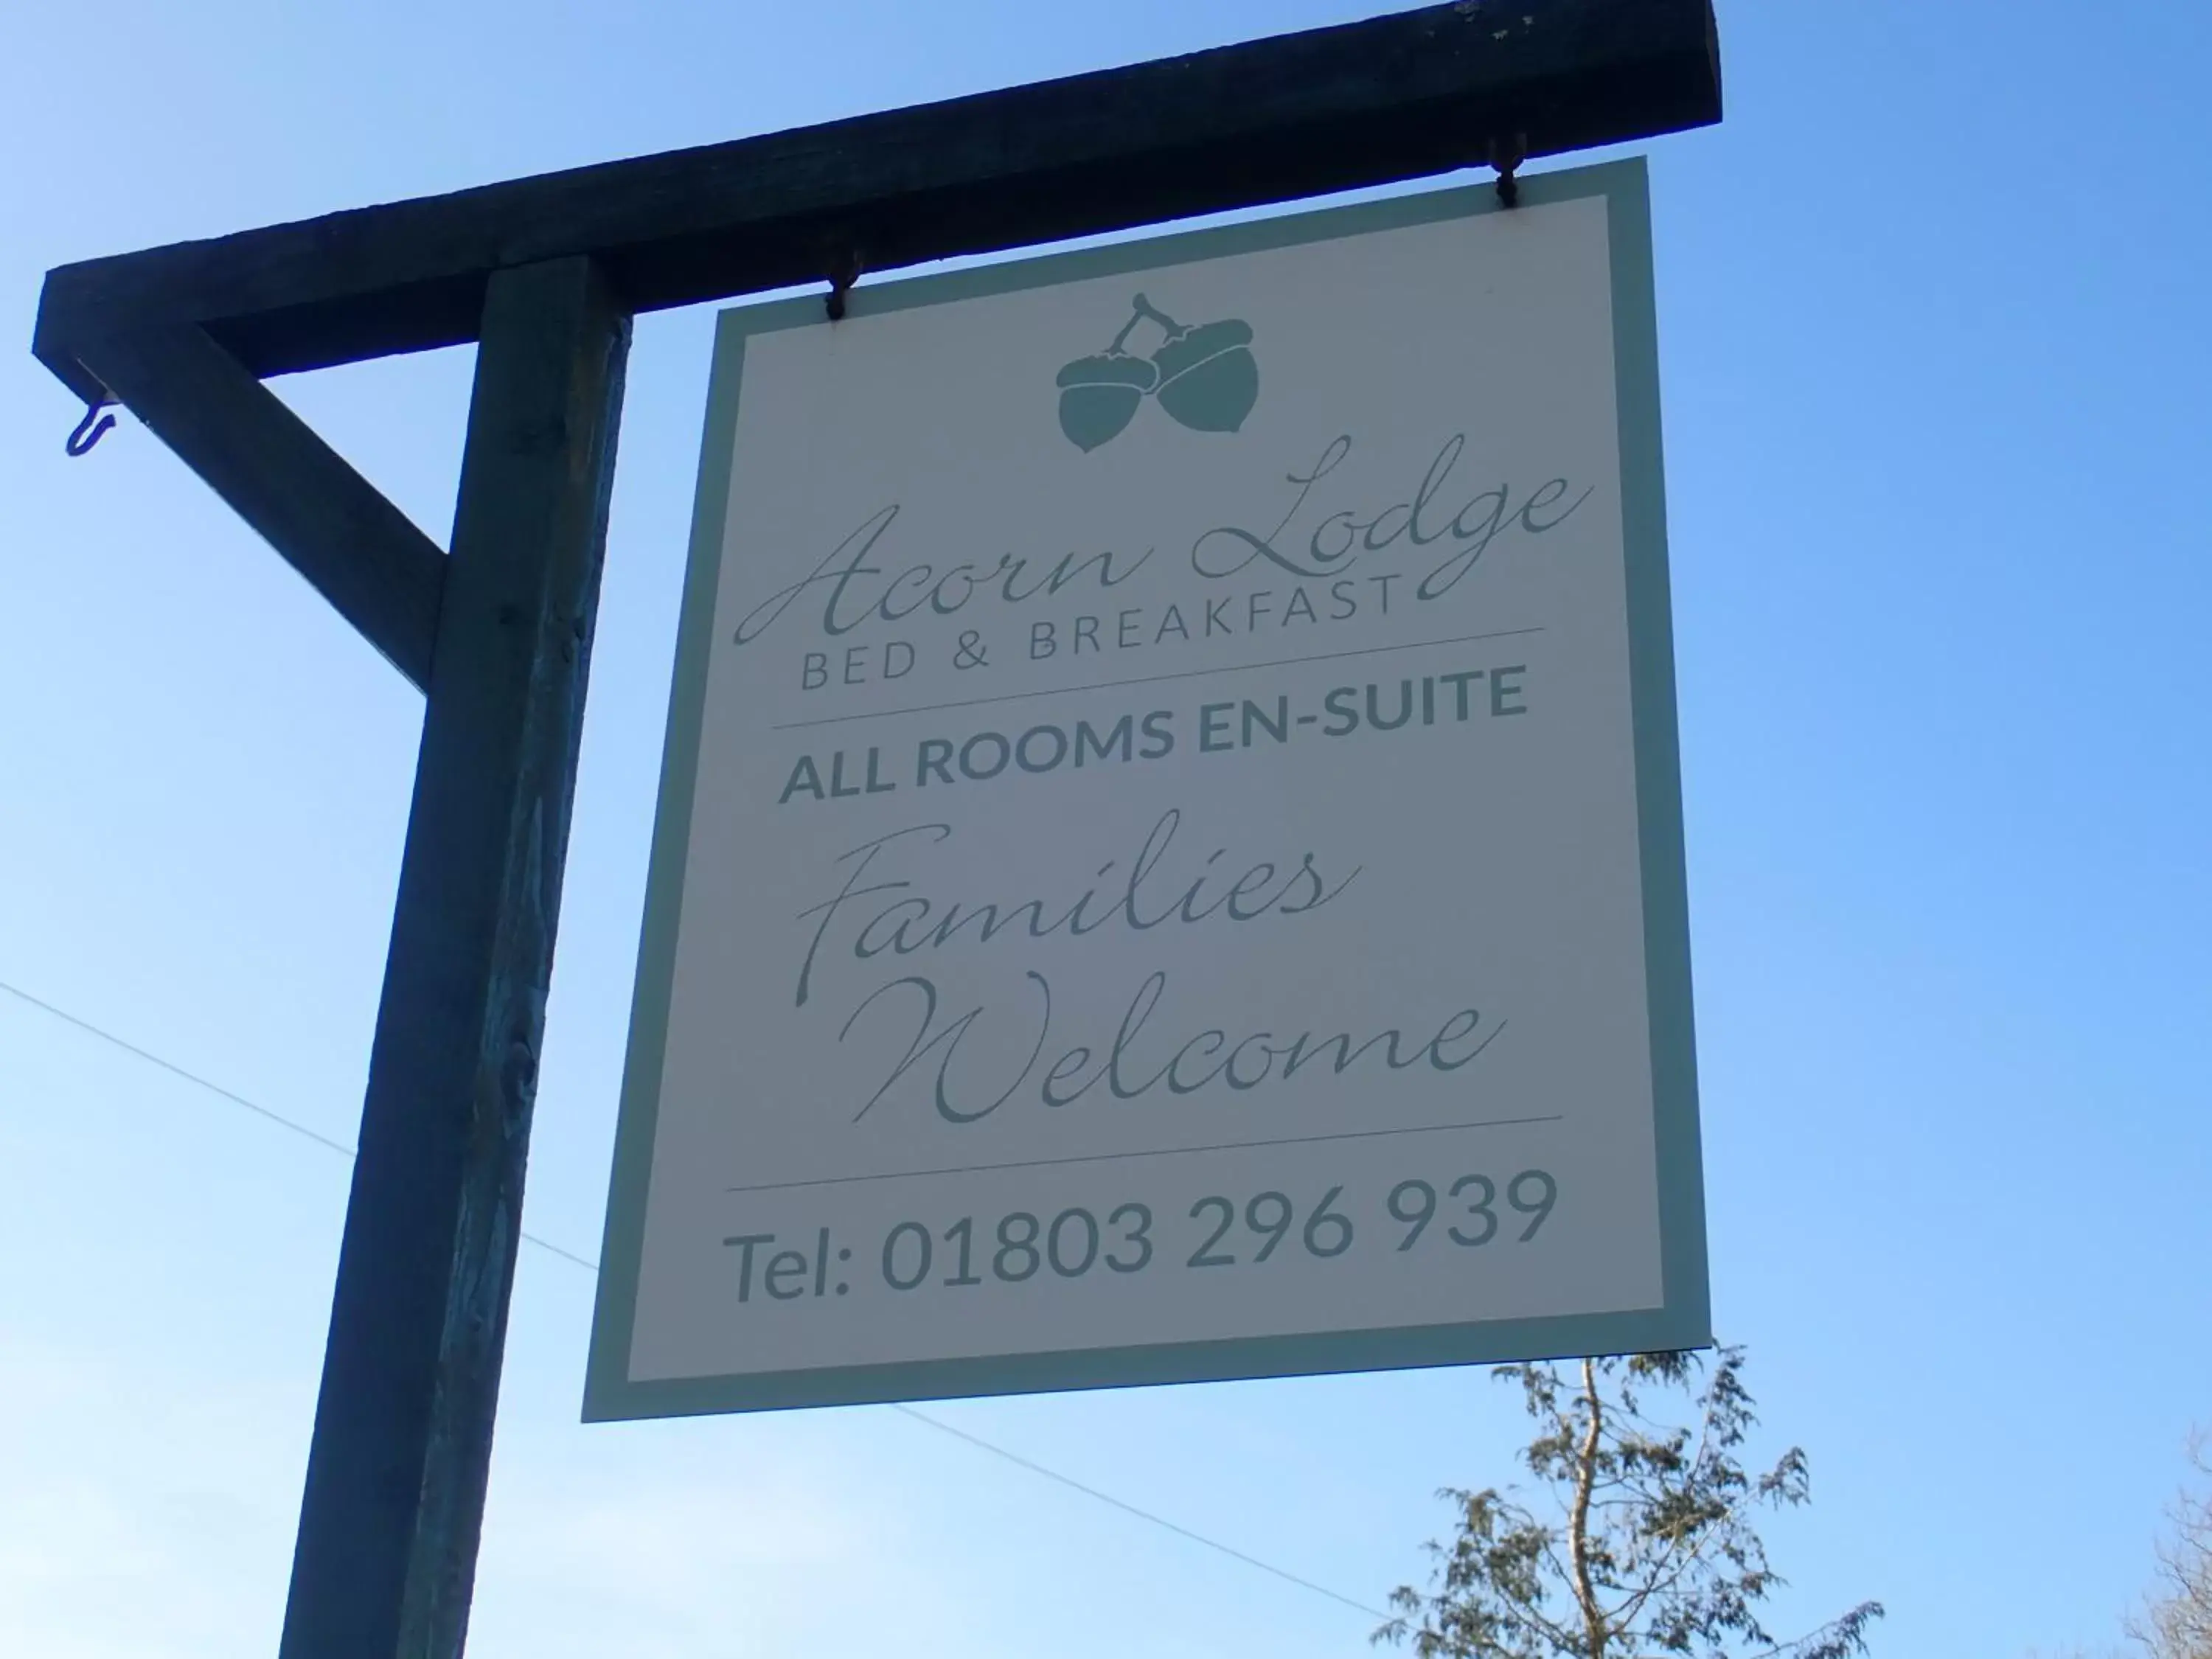 Property logo or sign in Acorn Lodge